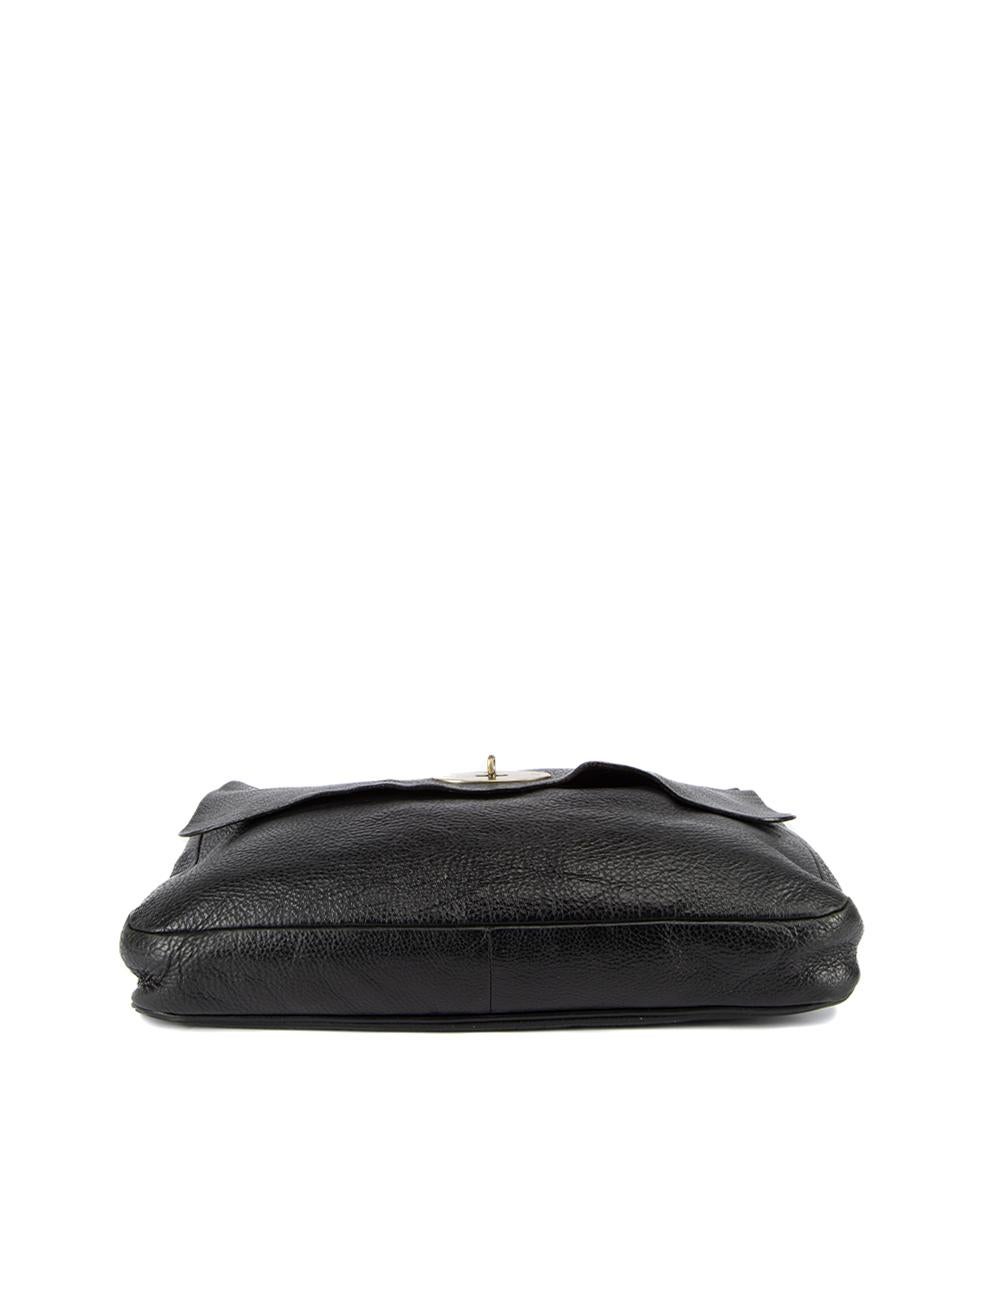 Mulberry Women's Black Leather Postman Lock Messenger Bag In Good Condition In London, GB